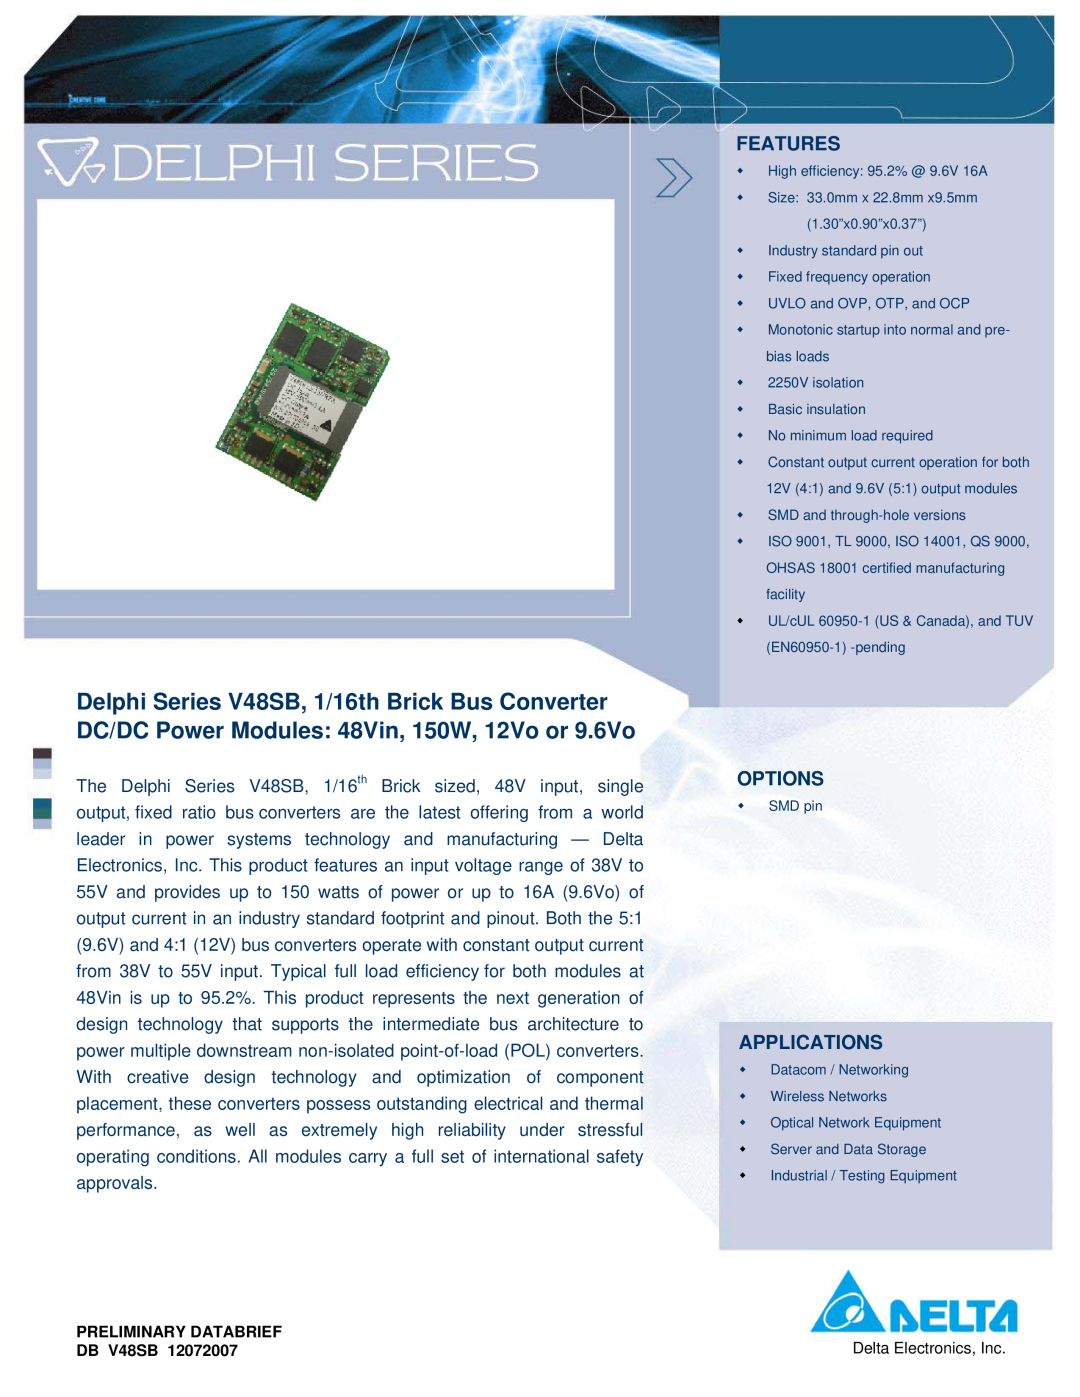 Delta Electronics Series V48SB manual Features, Options, Applications, PRELIMINARY DATABRIEF DBV48SB12072007 